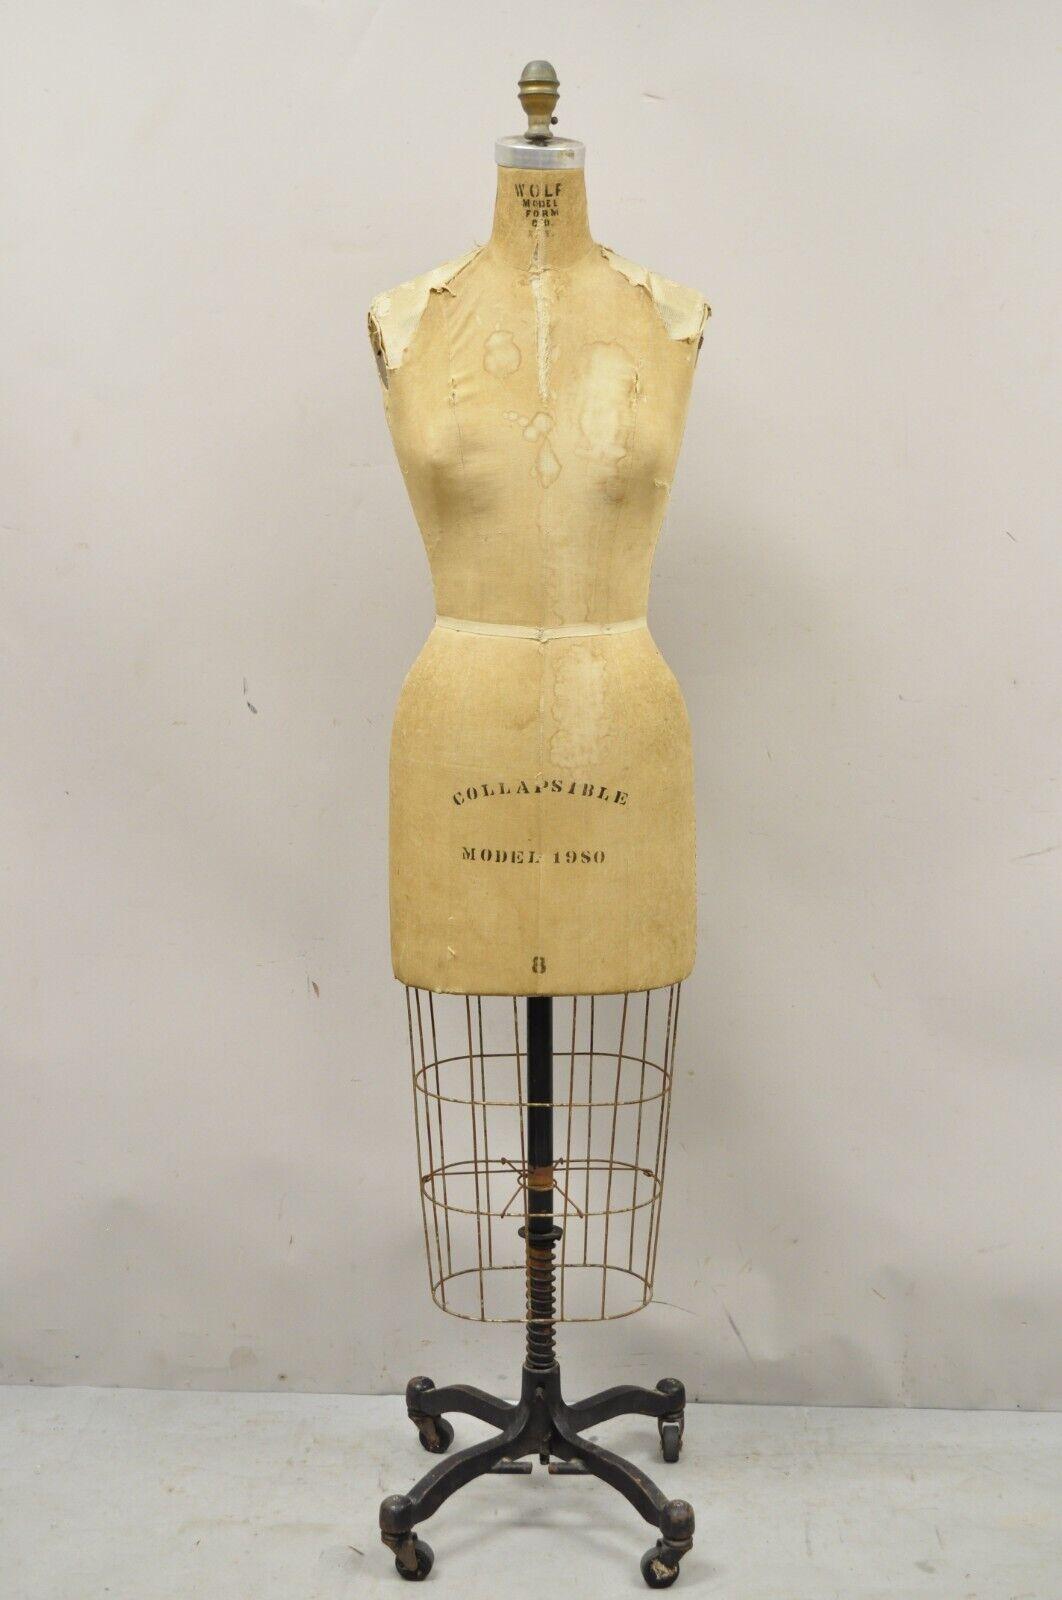 Vintage Wolf Model form model 1980 size 8 dress Form Mannequin. Item features a metal cage base, rolling casters, original stamp, very nice vintage item, great style and form. Circa Late 20th Century. Measurements: 63